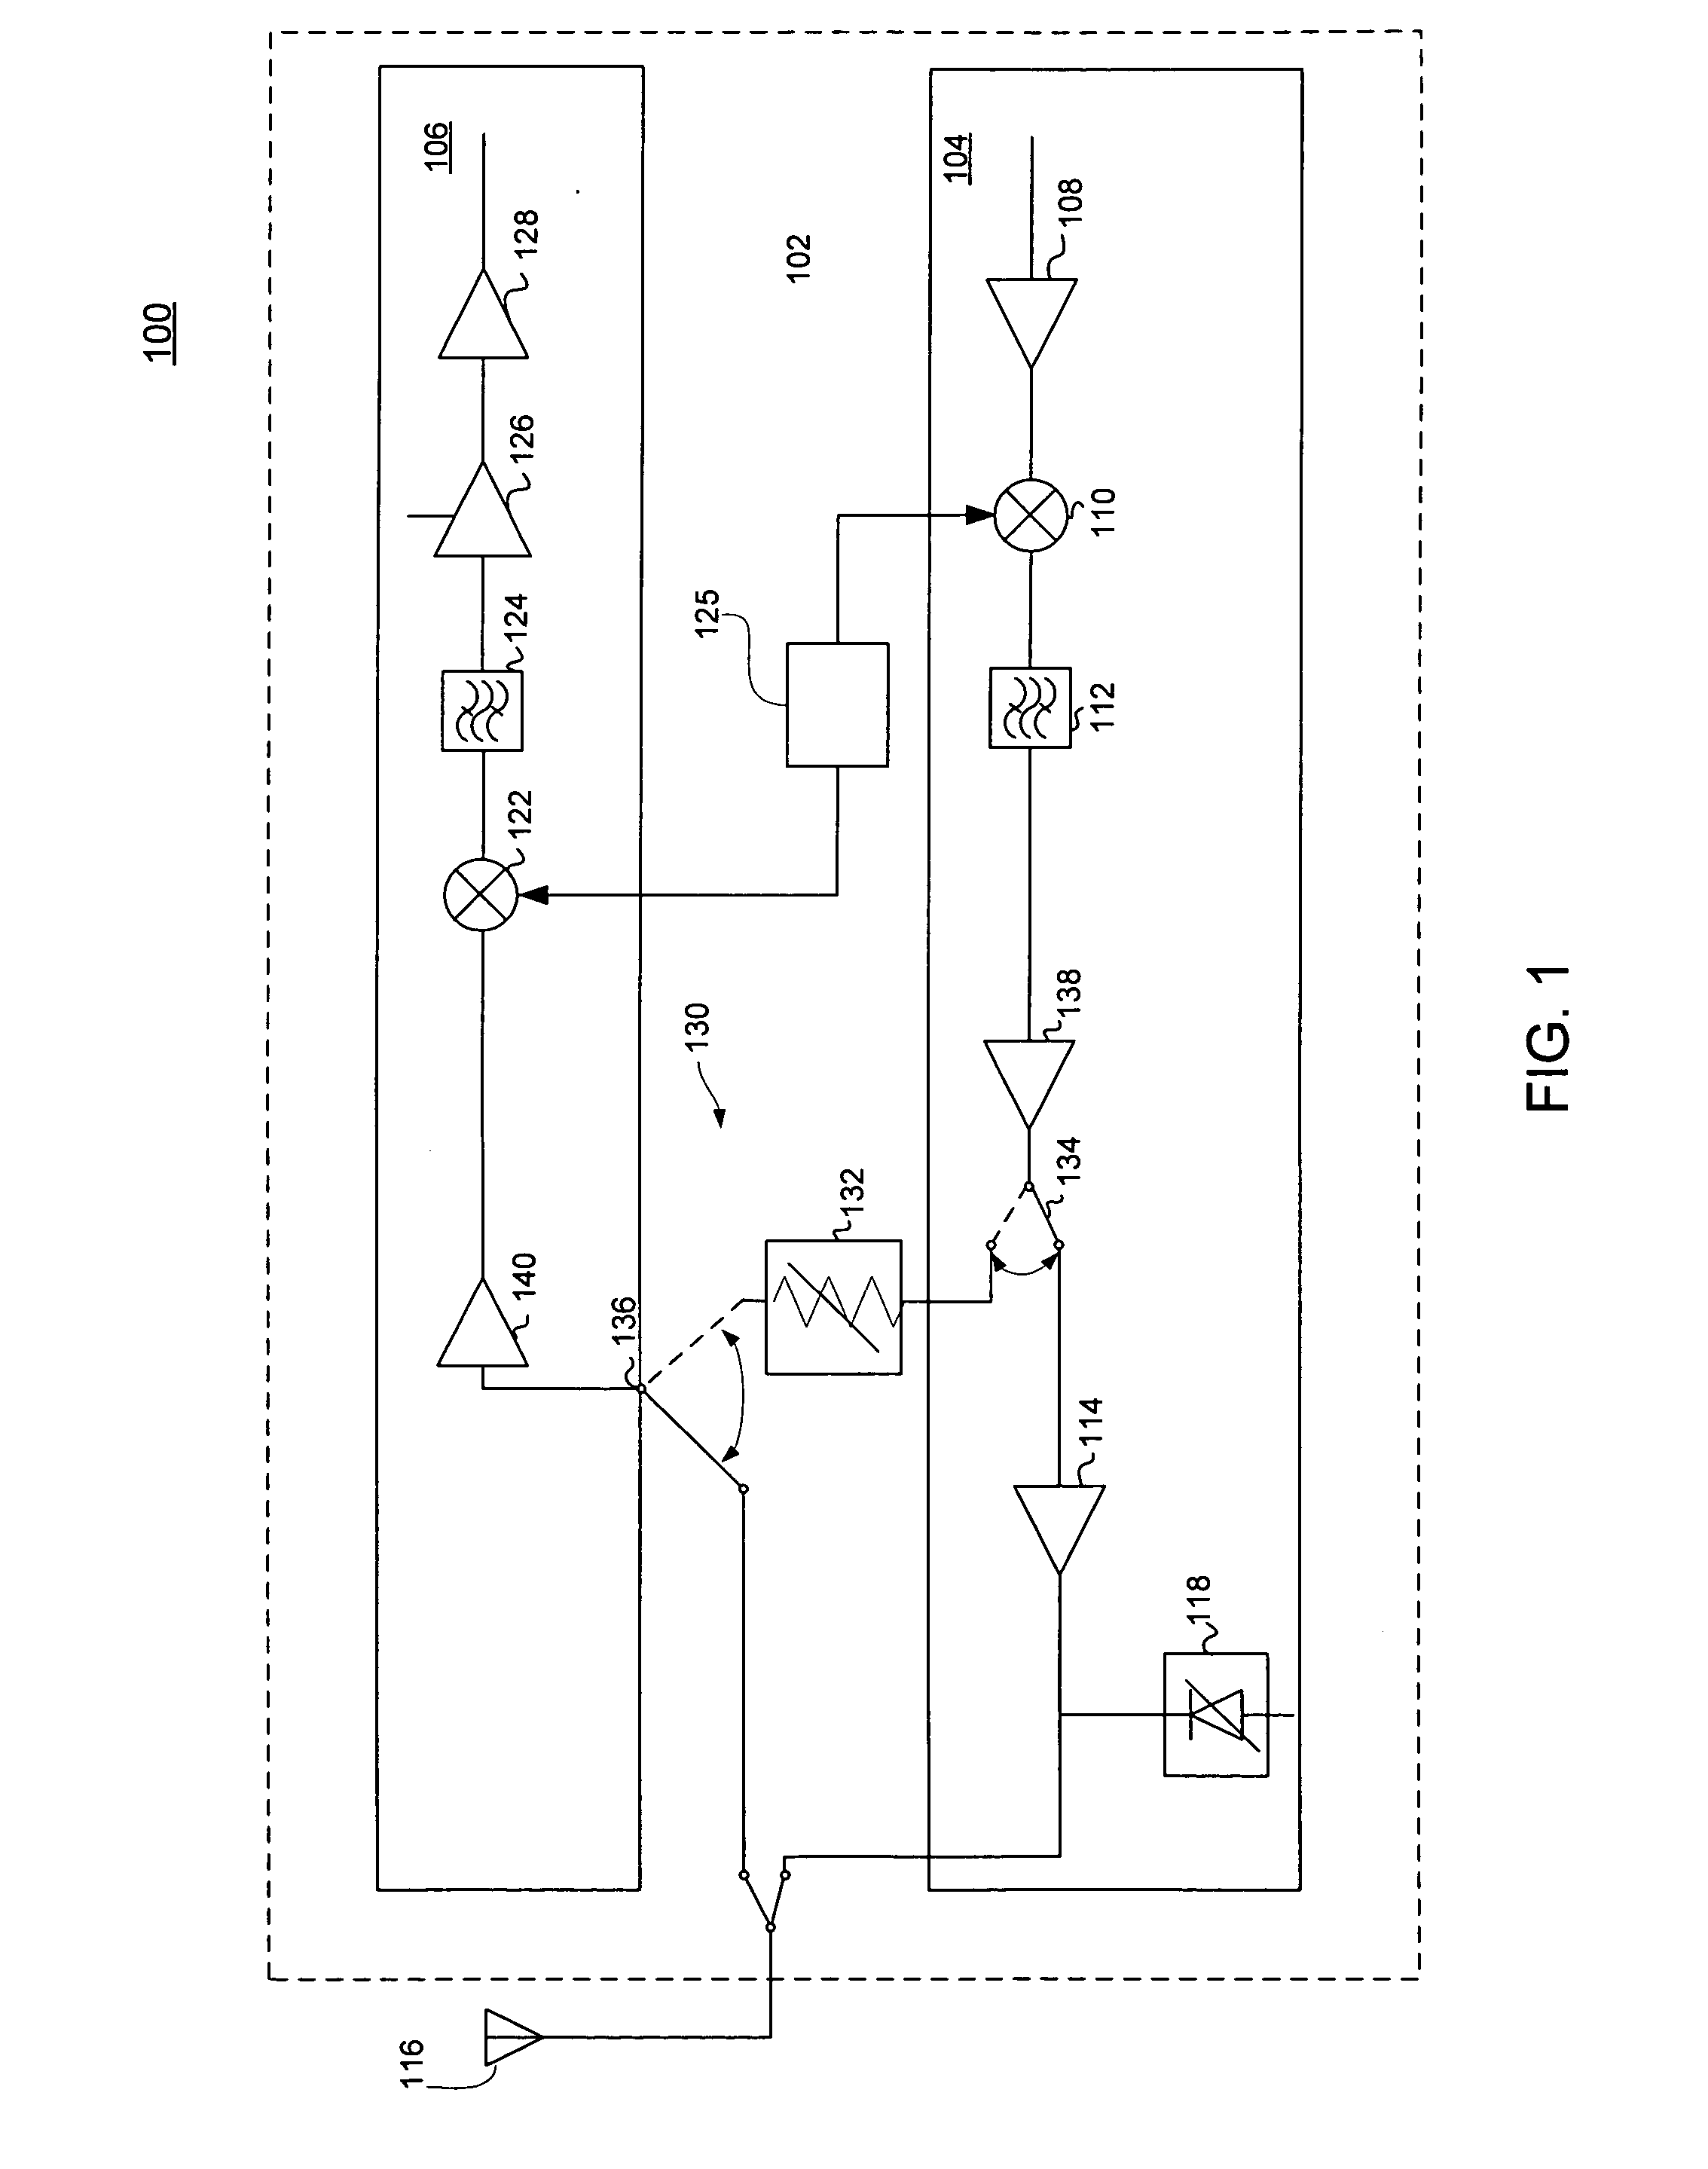 Embedded IC test circuits and methods